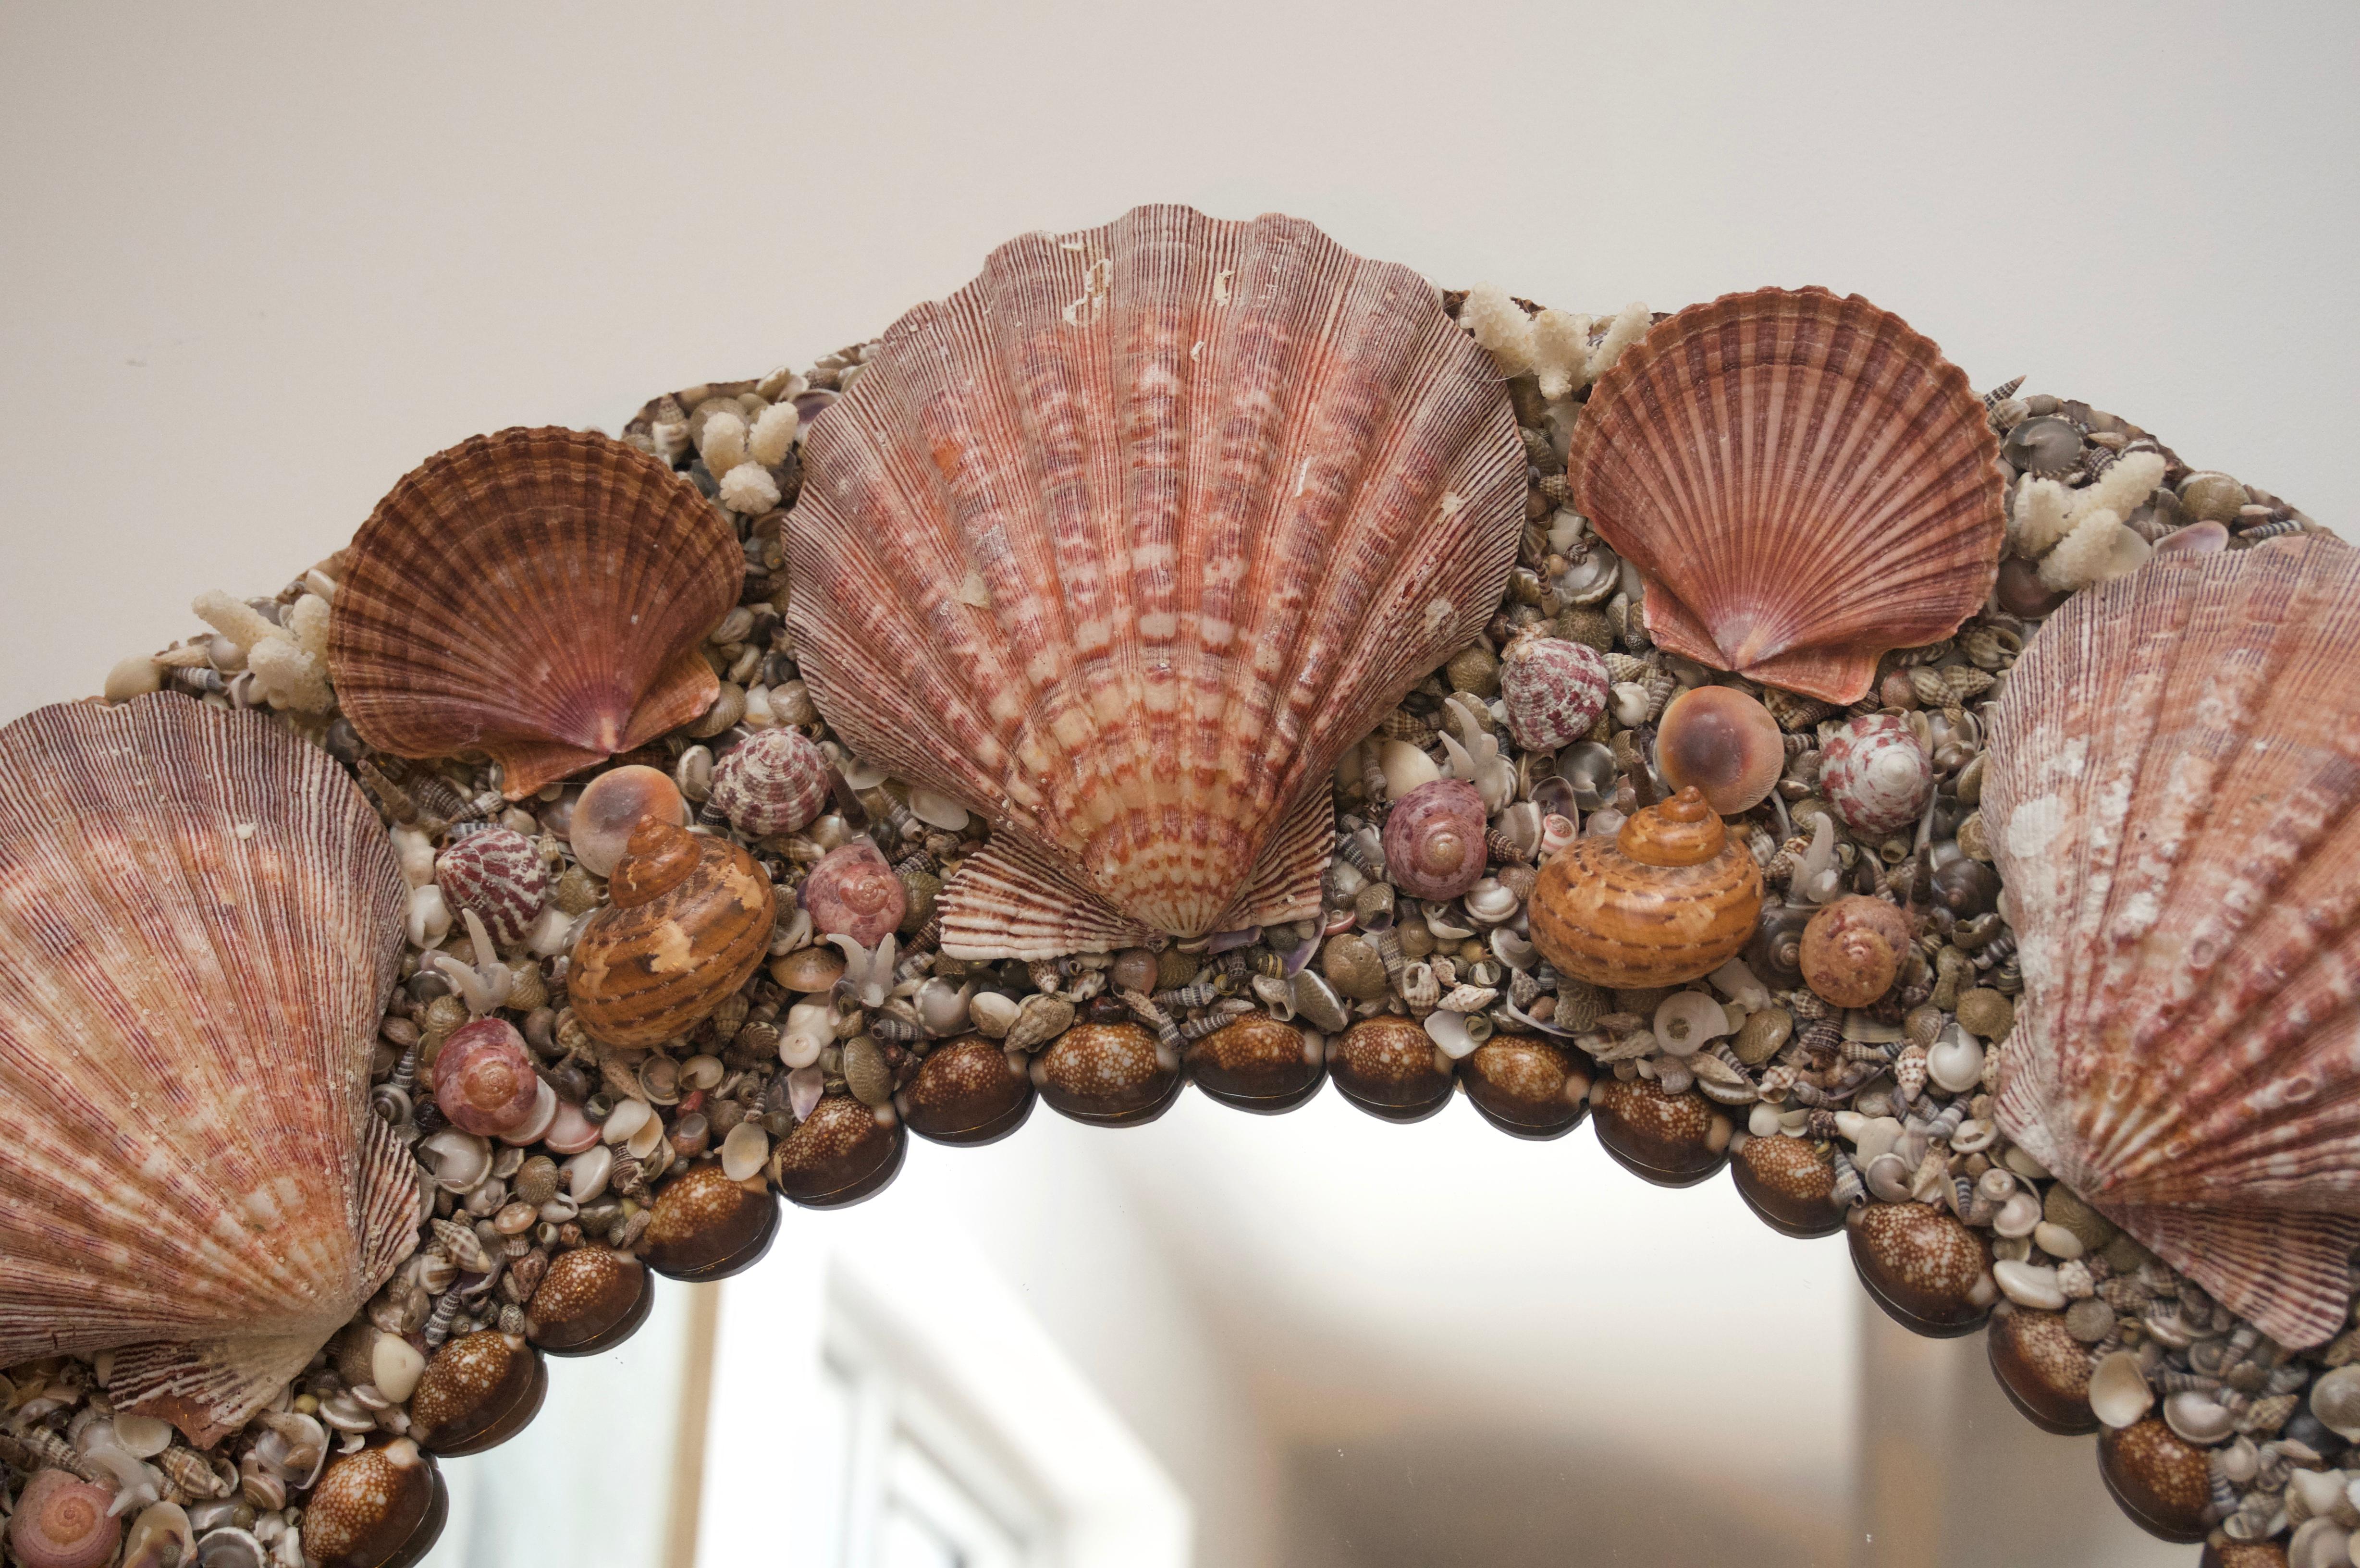 This stylish and custom made seashell encrusted mirror is very much in the style of pieces coveted by Tony Duquette and can been seen stylish homes from Bel-Air to Palm Beach.

This piece was custom made for the gallery by a local artisan and thus